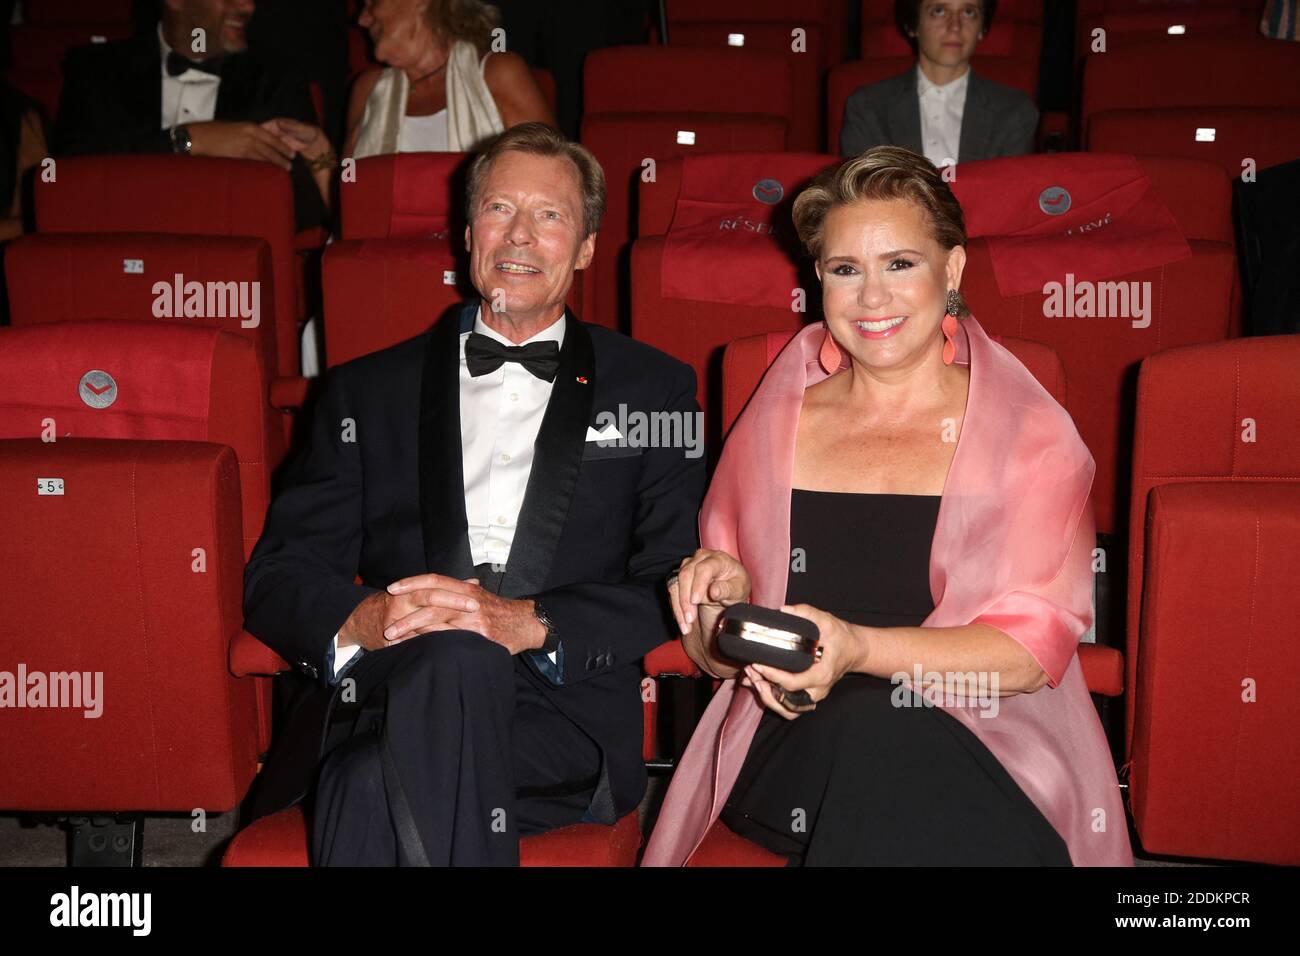 Grand Duke Henri of Luxembourg, Grand Duchess Maria Teresa of Luxembourg attending the closing ceremony of the 12th Angouleme Film Festival in Angouleme, France on August 25, 2019. Photo by Jerome Domine/ABACAPRESS.COM Stock Photo